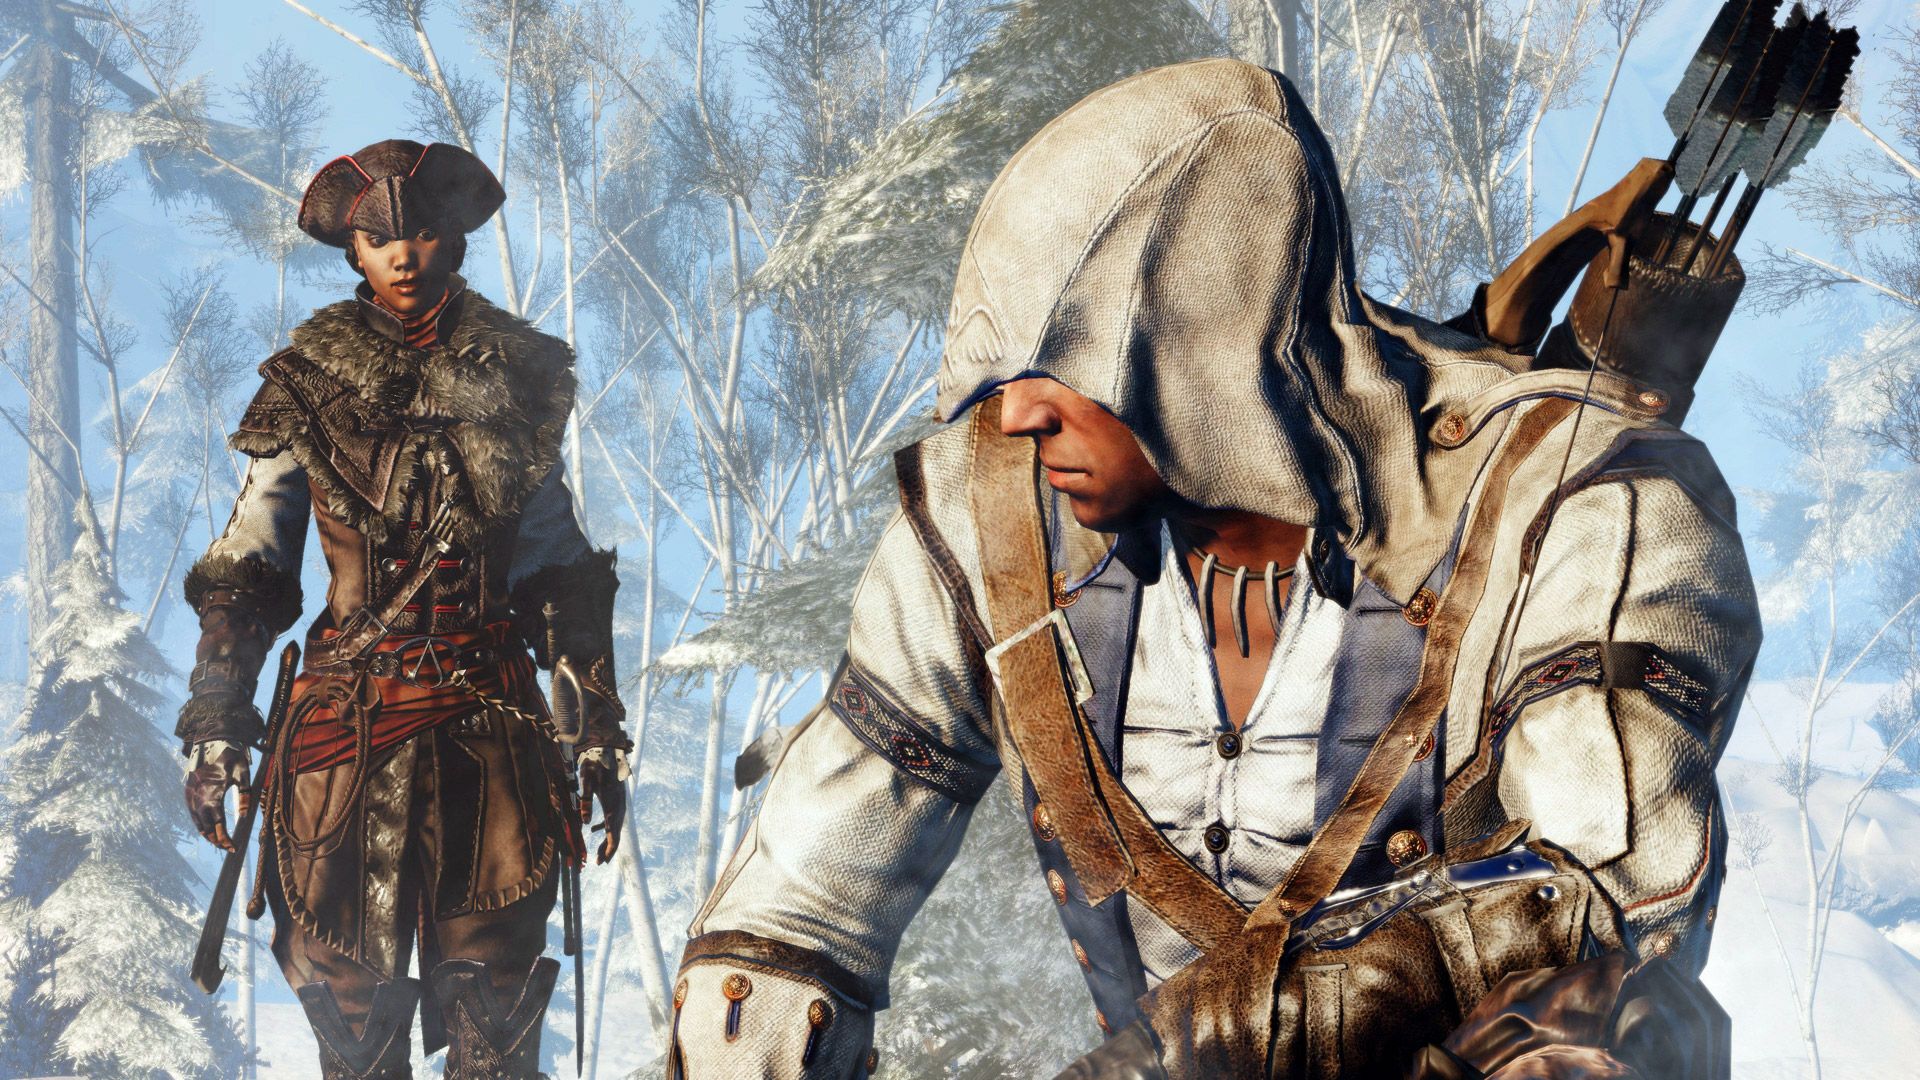 Assassin's Creed III: Liberation Wallpaper in 1920x1080